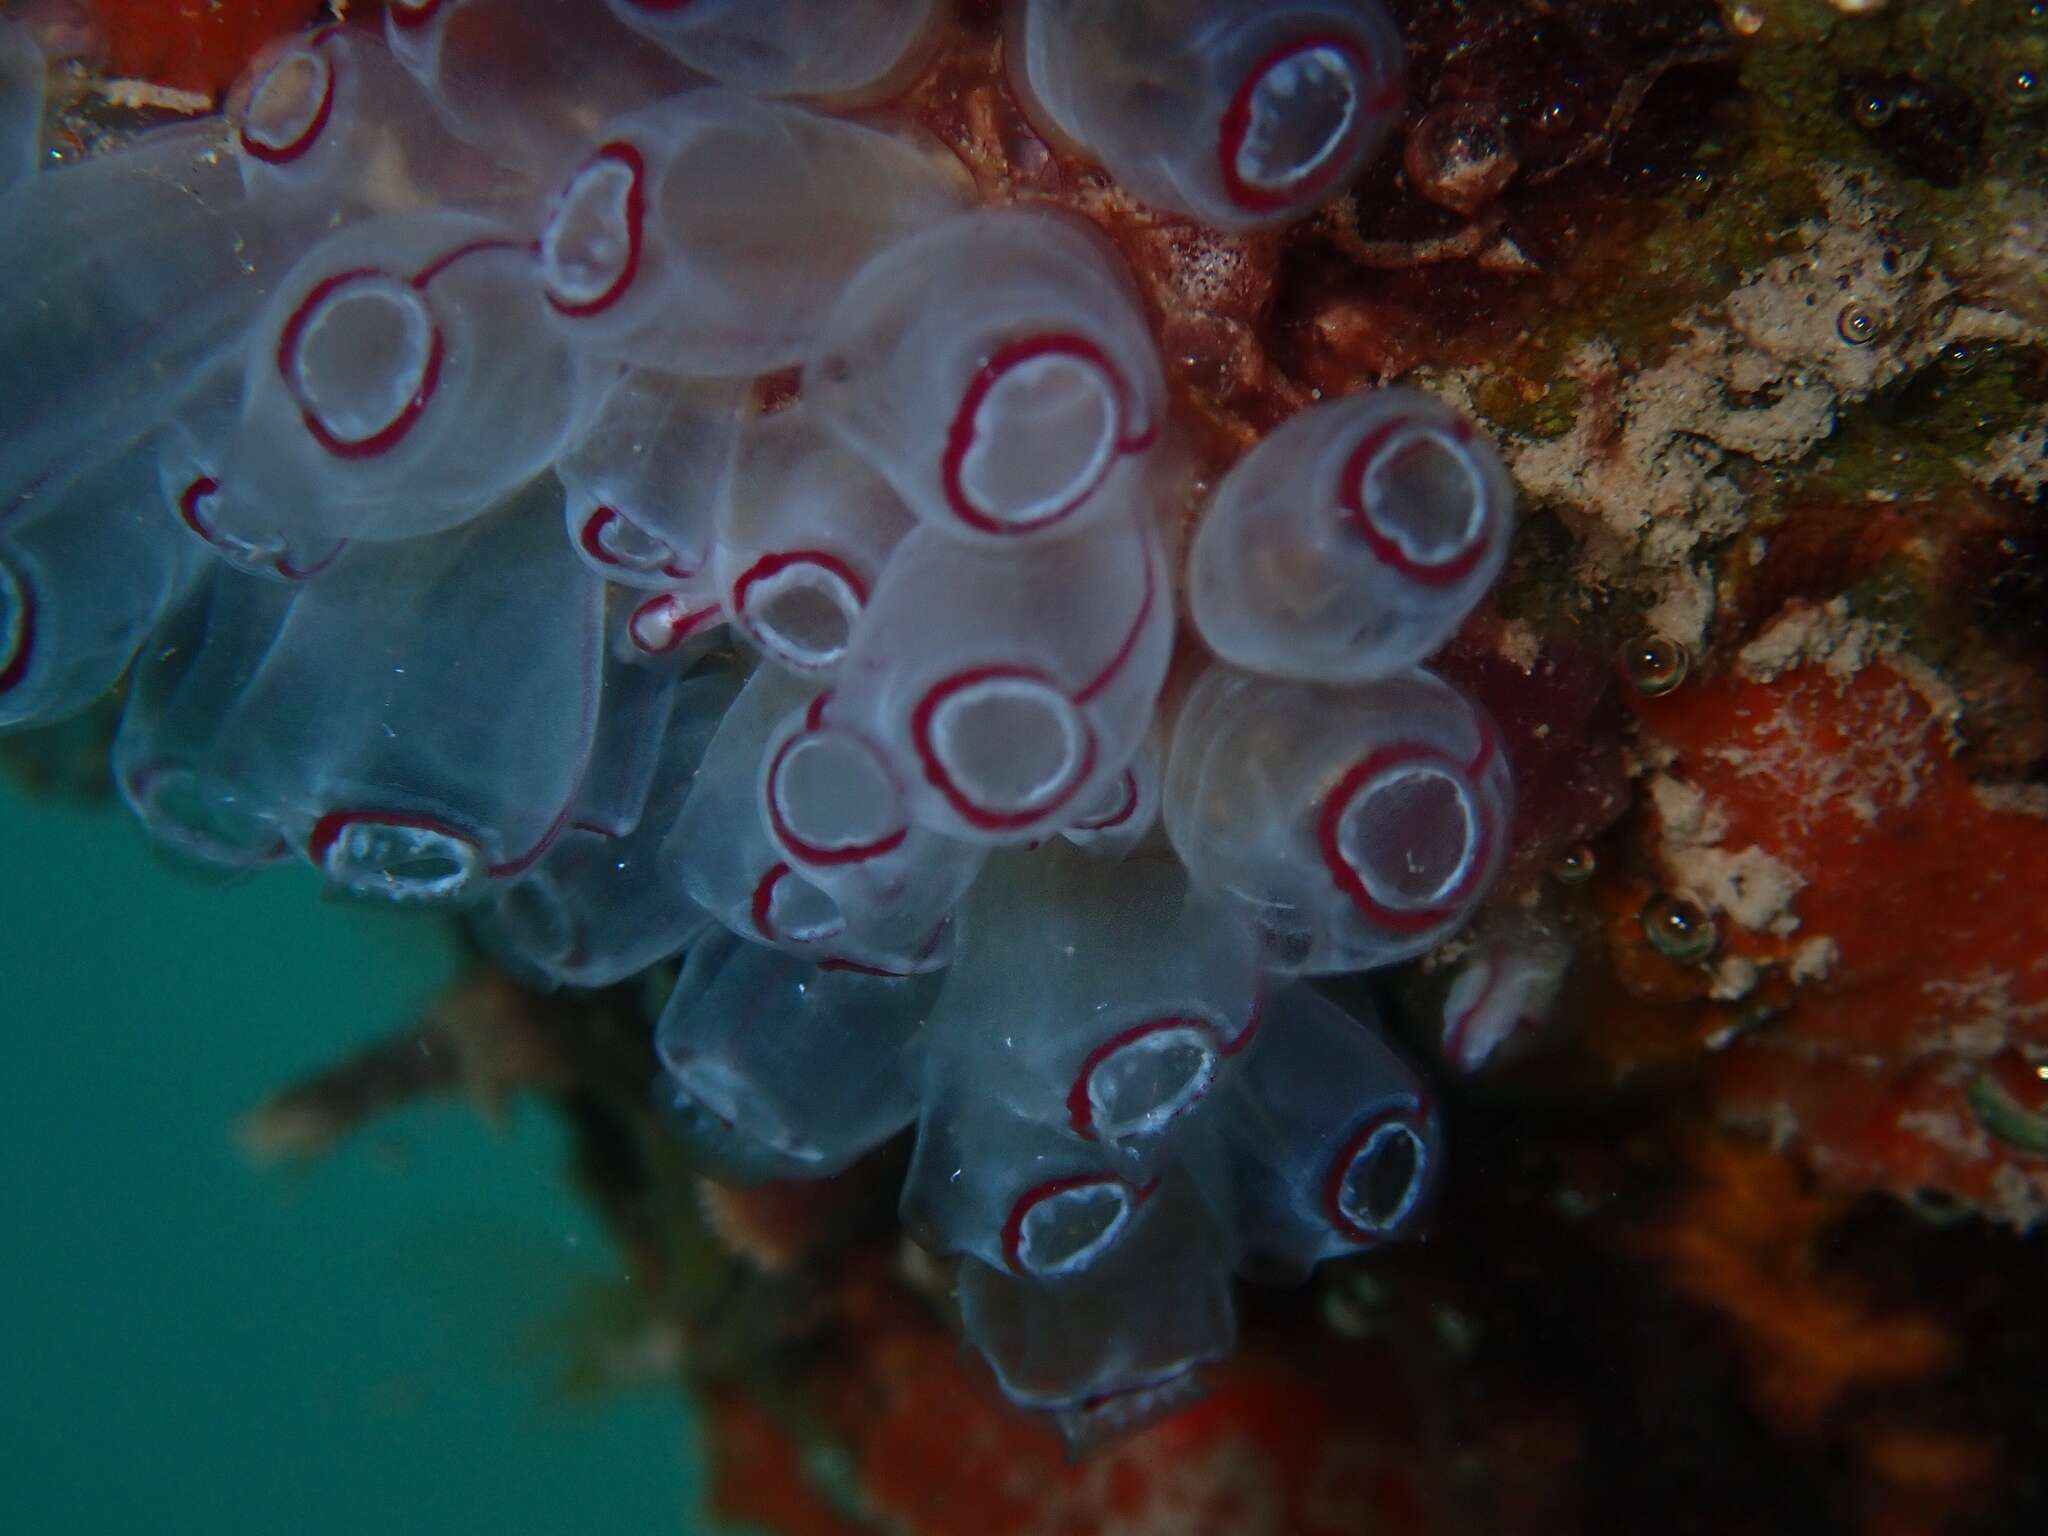 Image of painted tunicate